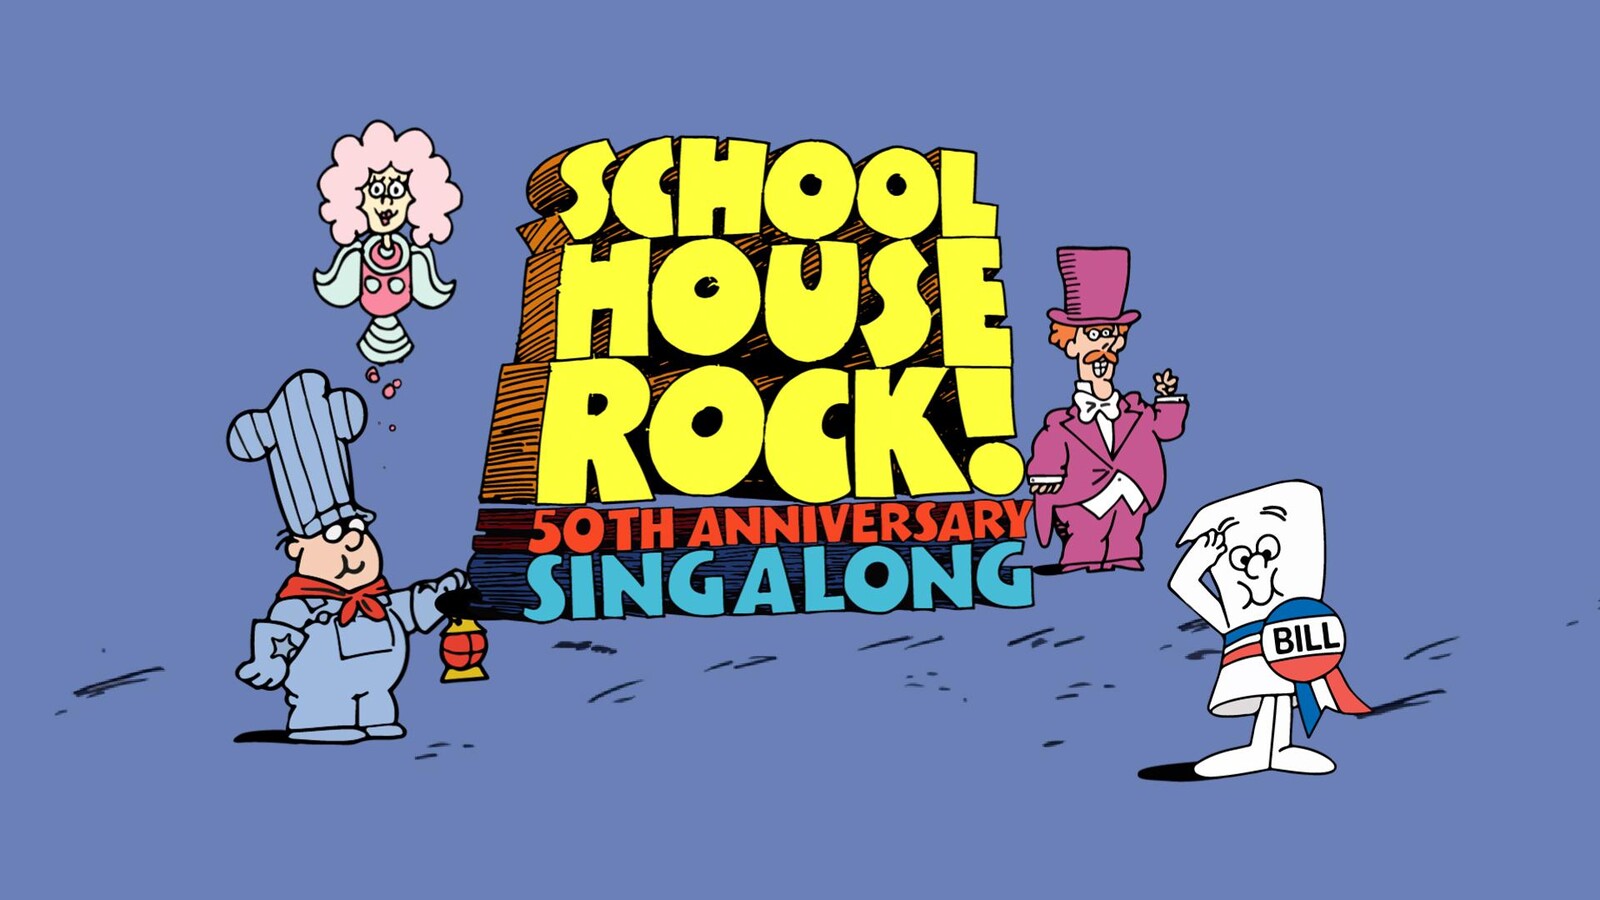 schoolhouse rock characters black and white